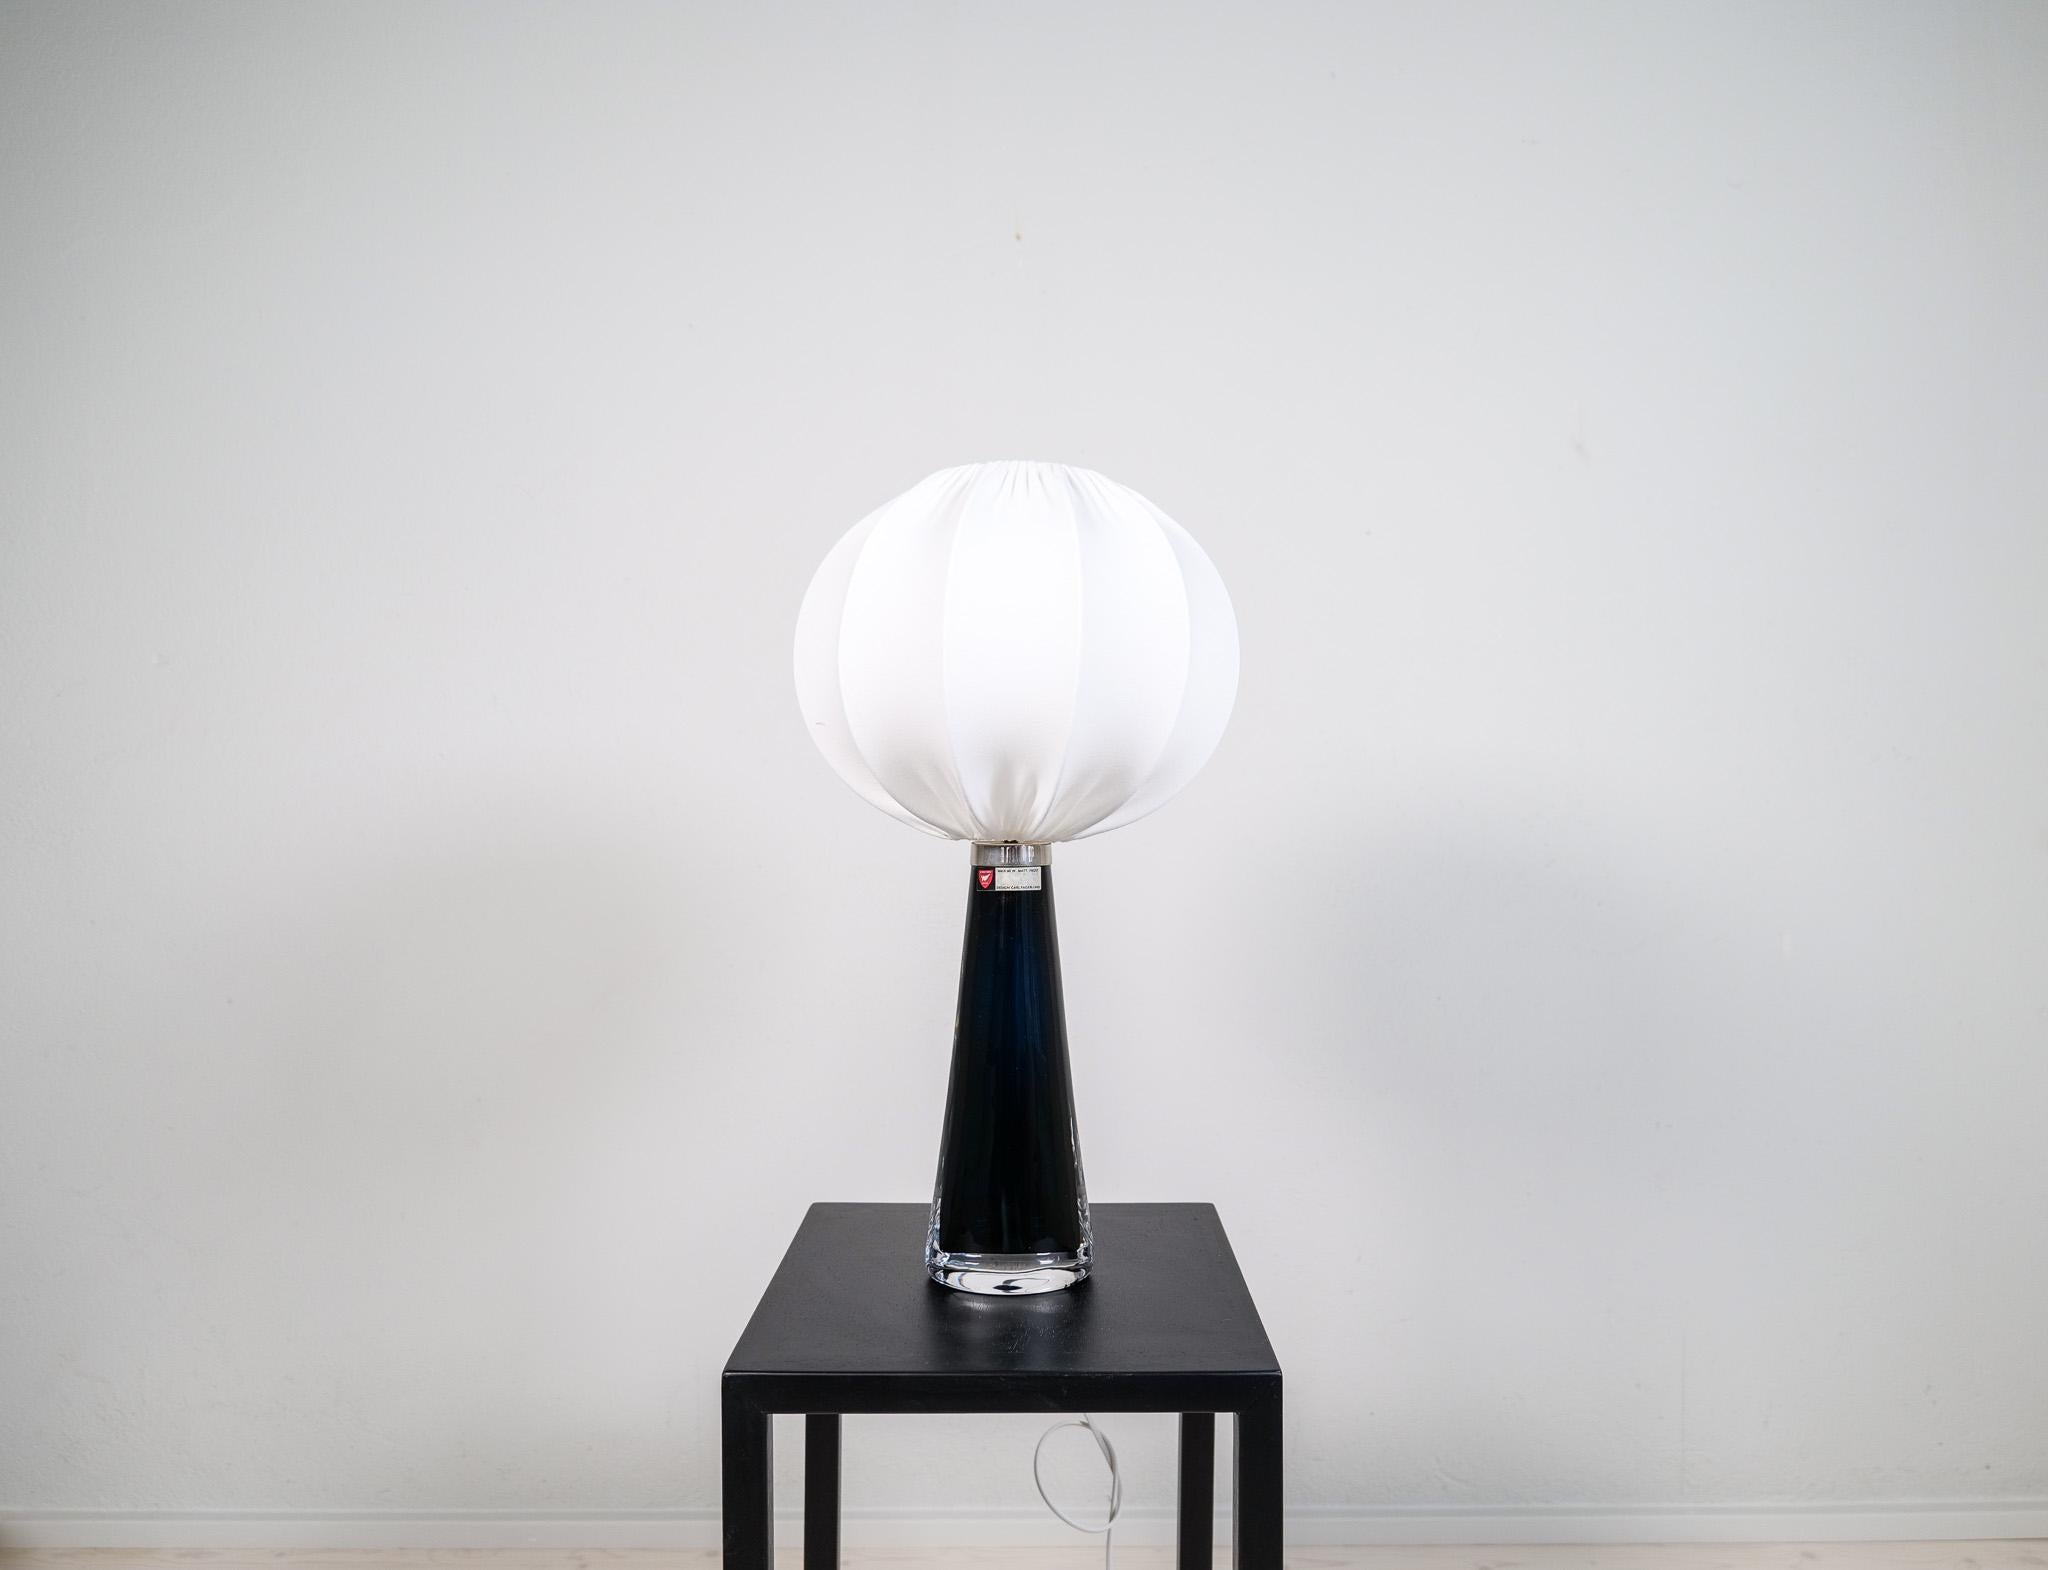 Table lamp in crystal, model RD1566 by Carl Fagerlund for Orrefors, Sweden.
The lamps have a stunning black color with brass details. The intensity of the crystal glass and its colored glass inside makes this a great piece. This one with an all-new